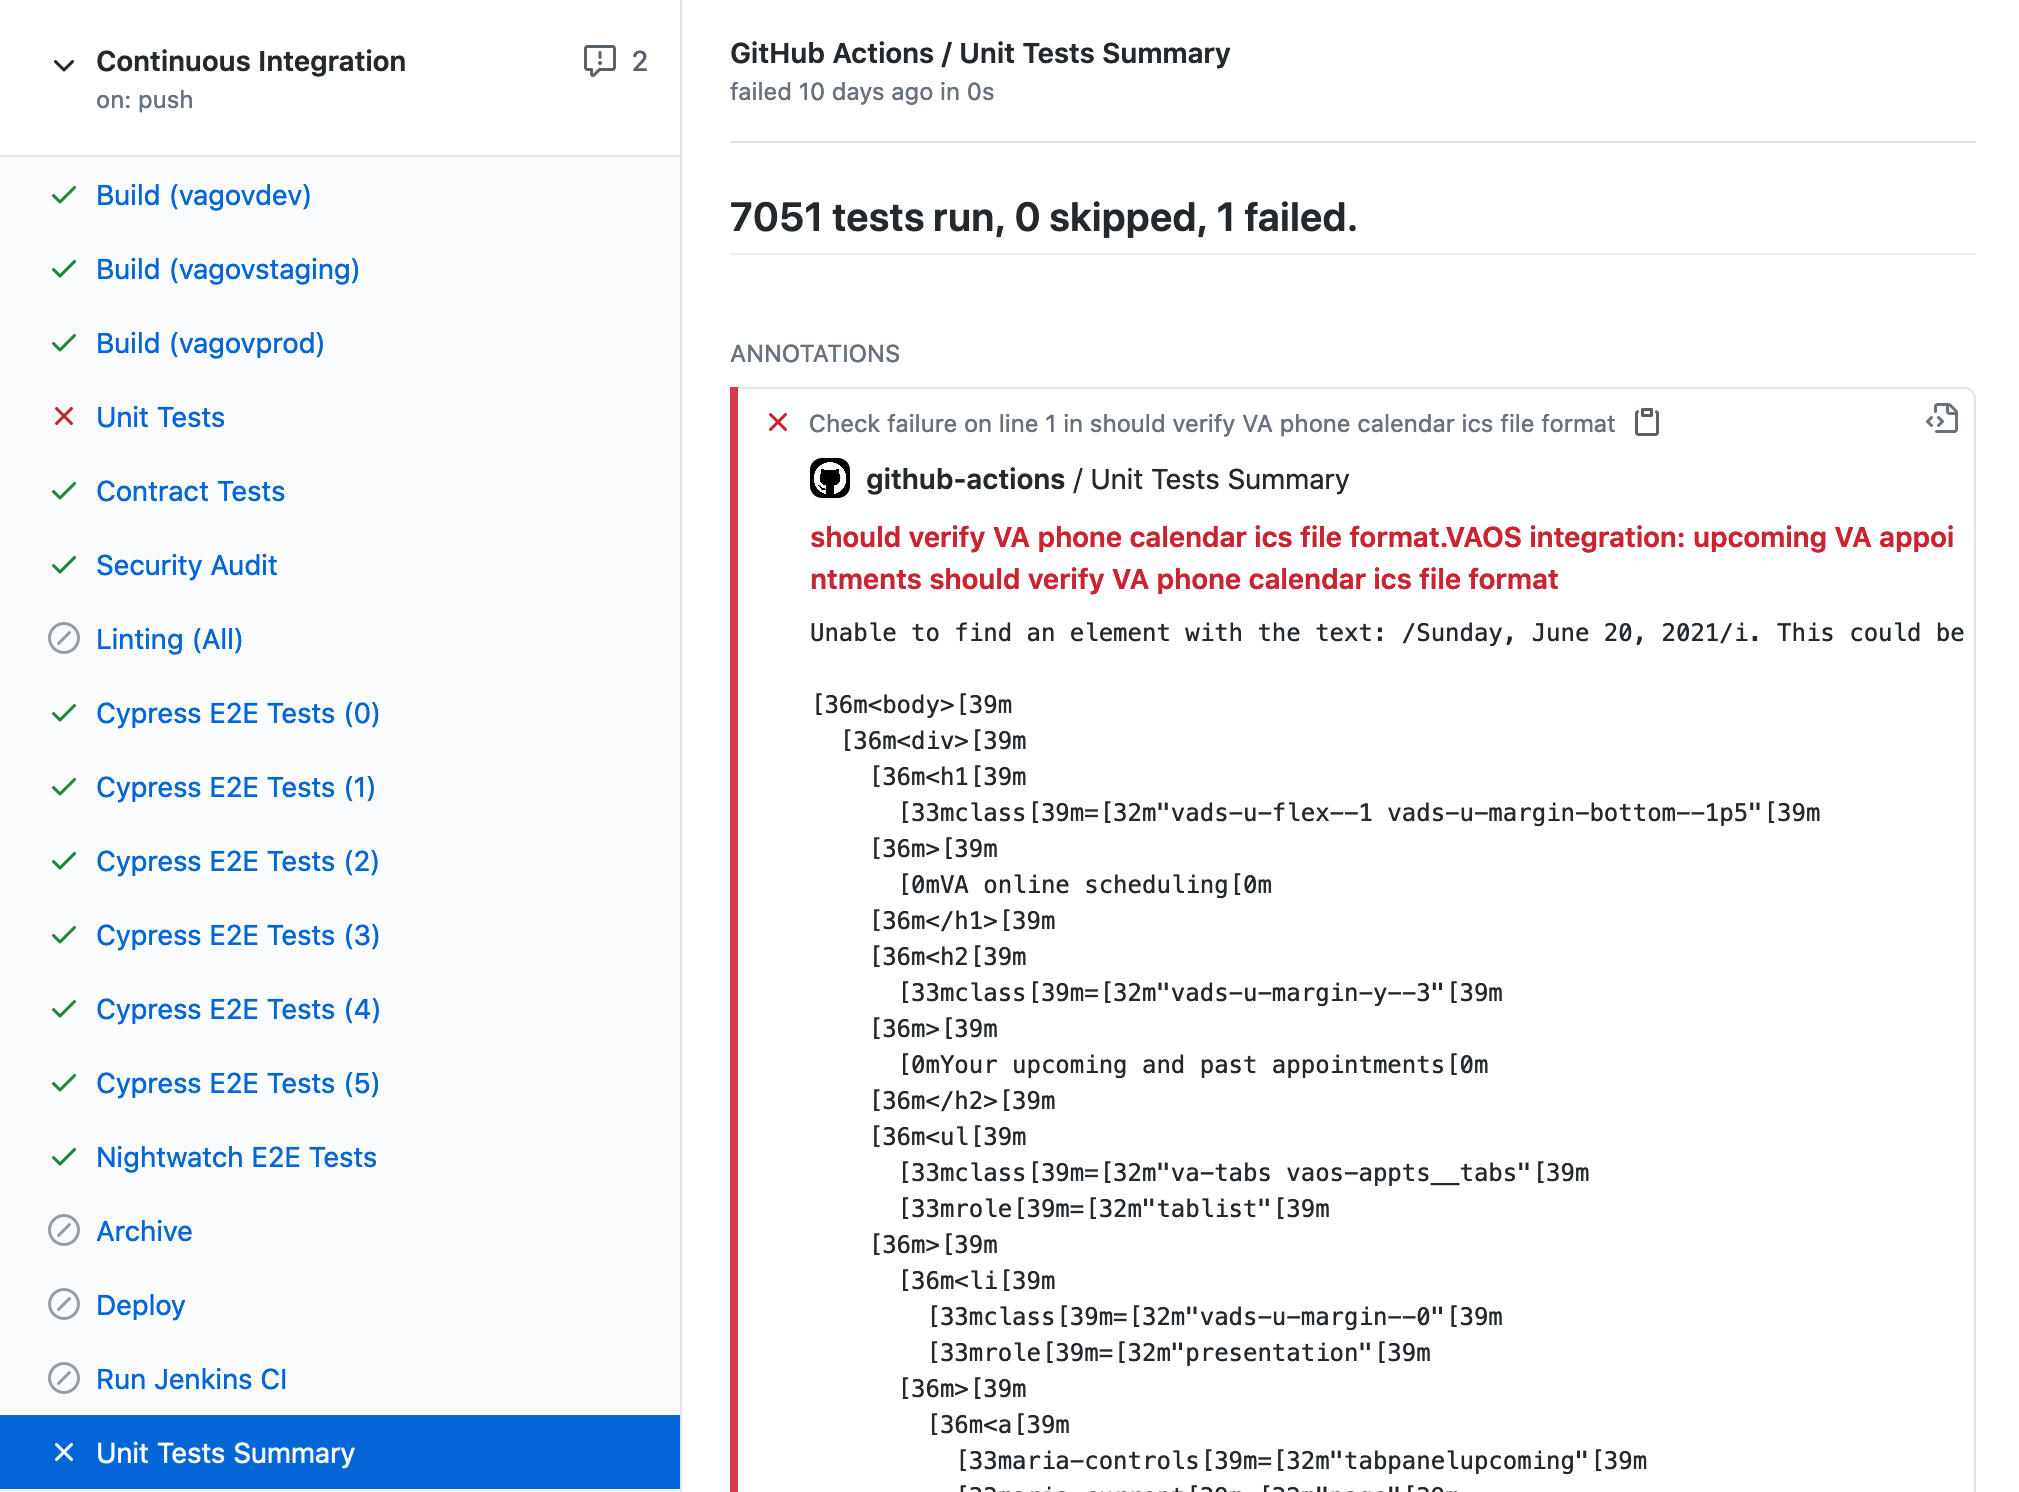 Screenshot shows list of jobs in the workflow on the left including one called Unit Tests Summary, which is expanded on the right. The expanded summary shows 7051 tests run, 0 skipped, 1 failed. The annotation shows details on the failed unit test.